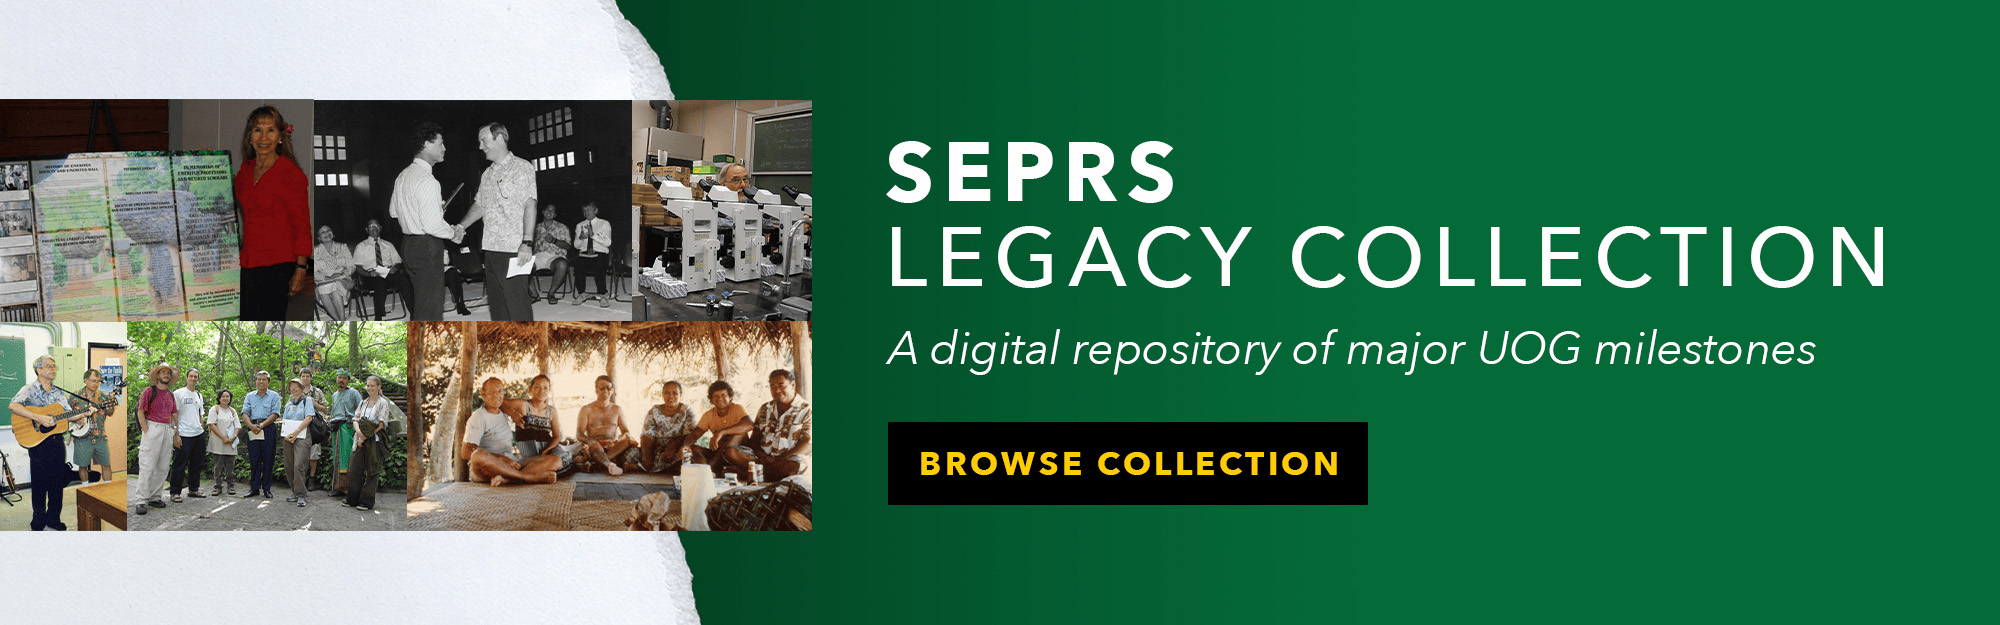 Banner image for the SEPRS Legacy Collection